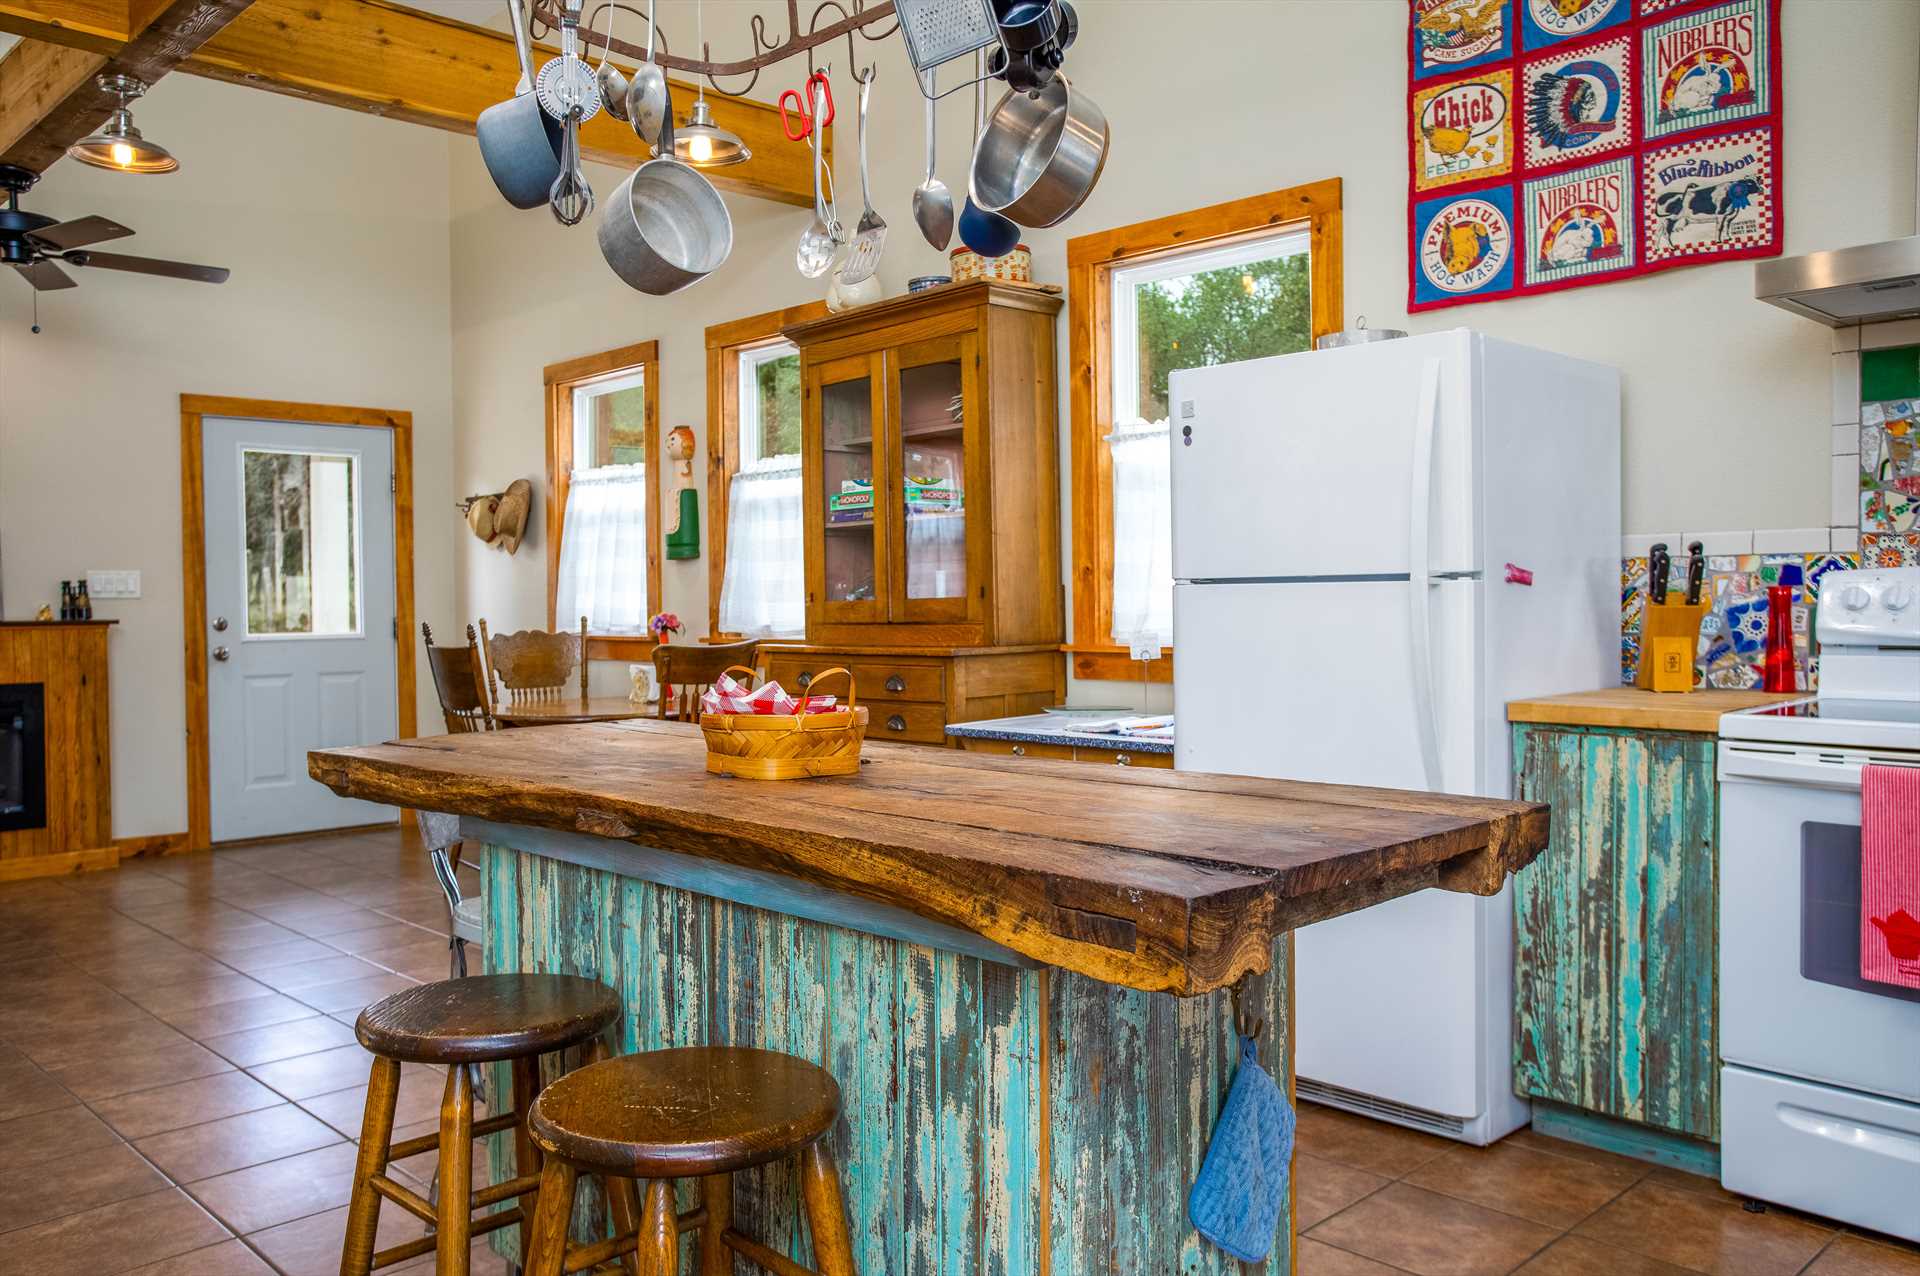                                                 Visitors here love the whimsical and rustic sky-blue barnboard highlights in the kitchen area!